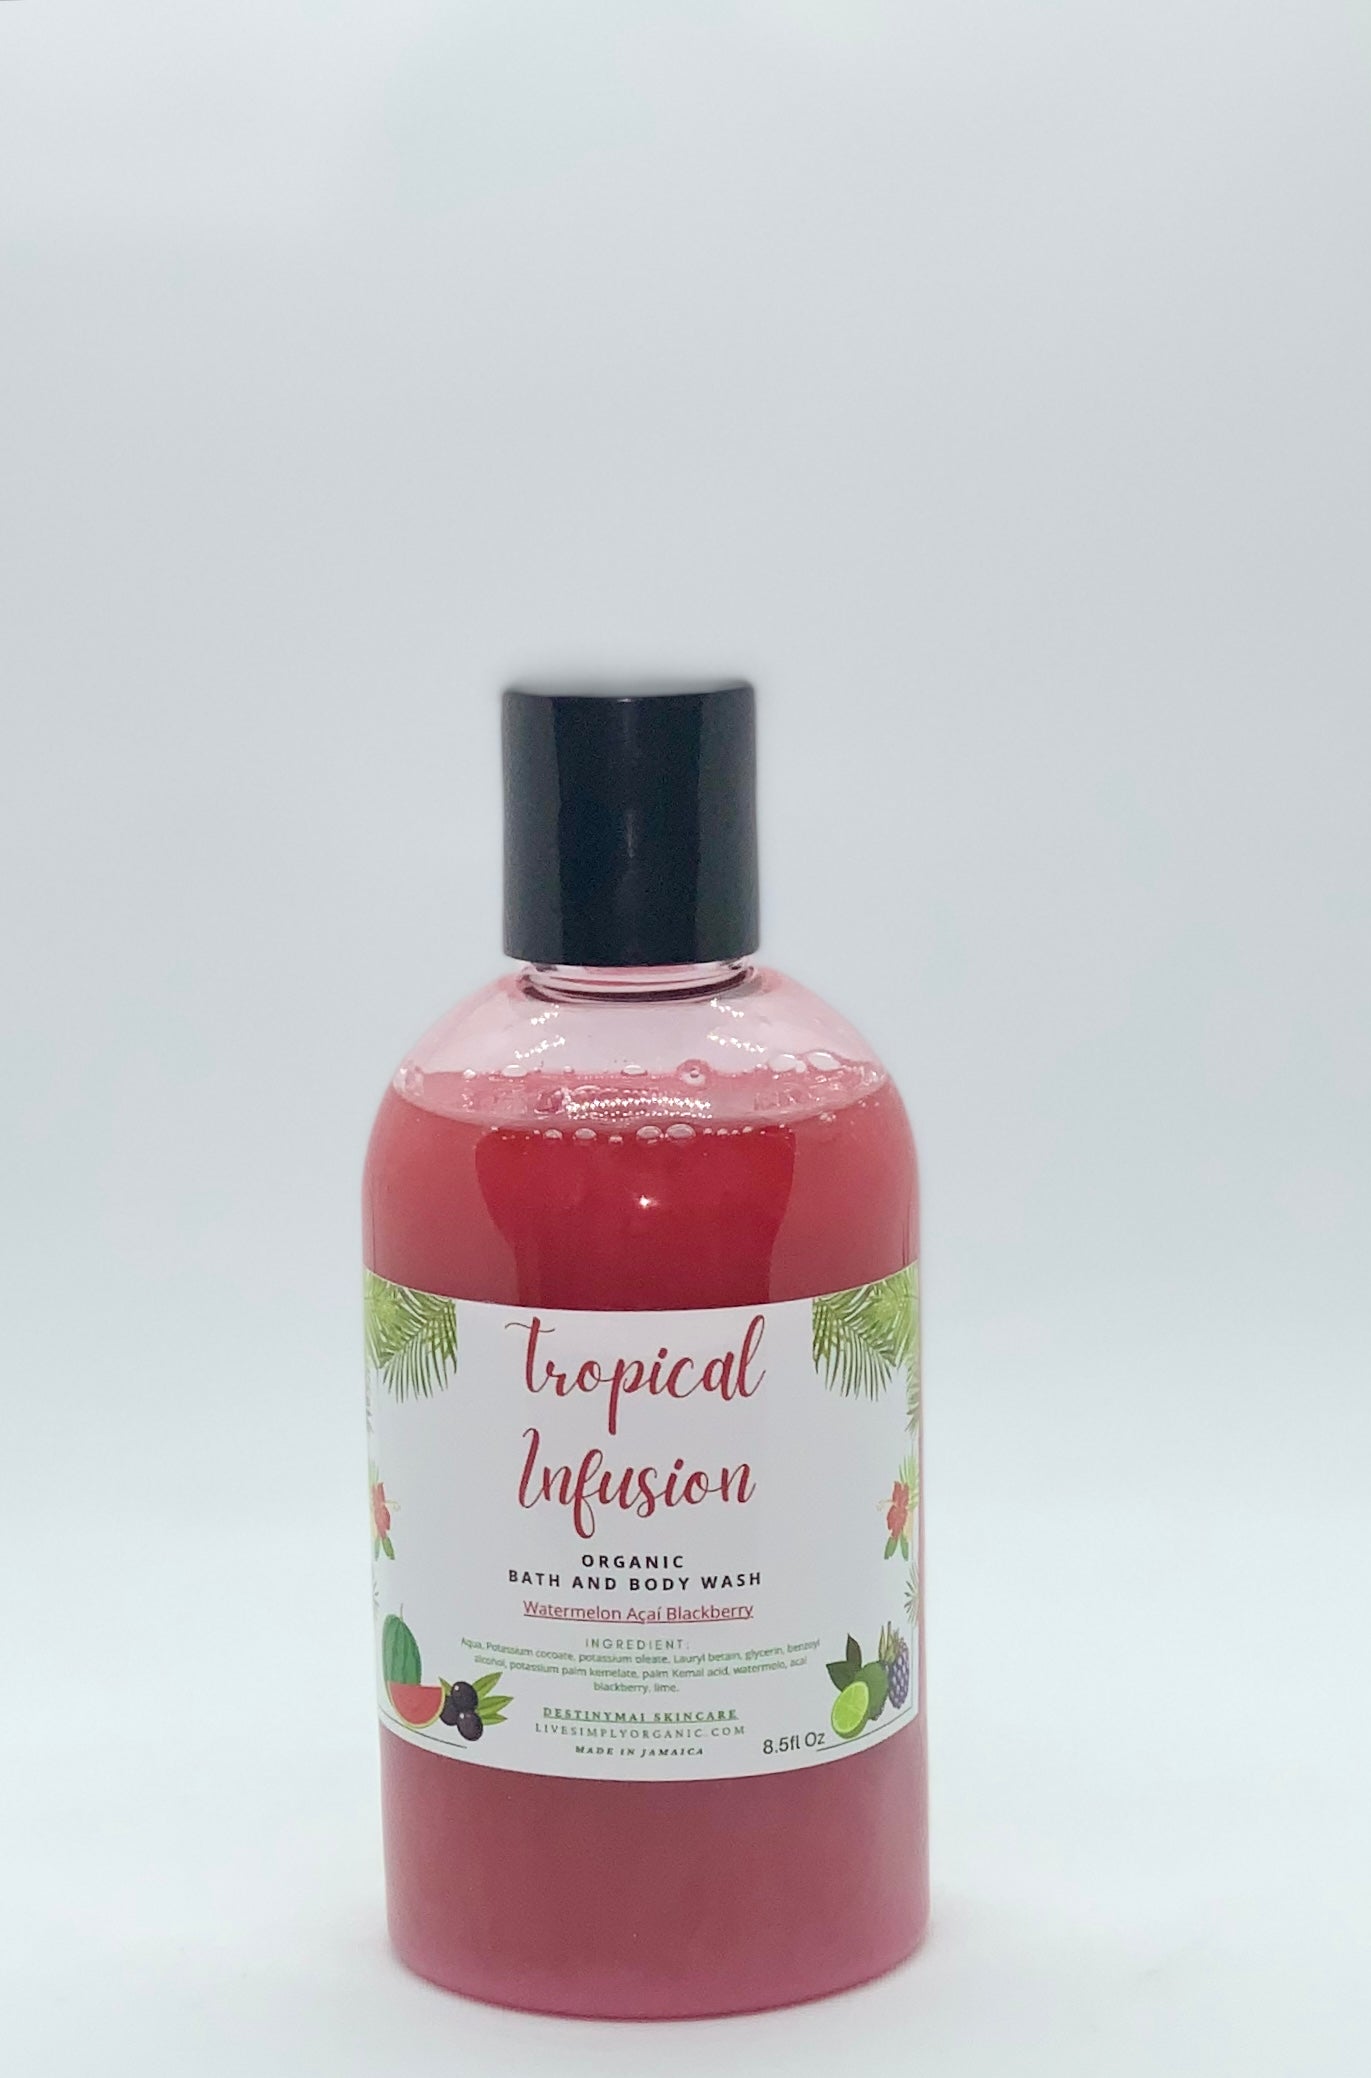 Tropical infusion body wash